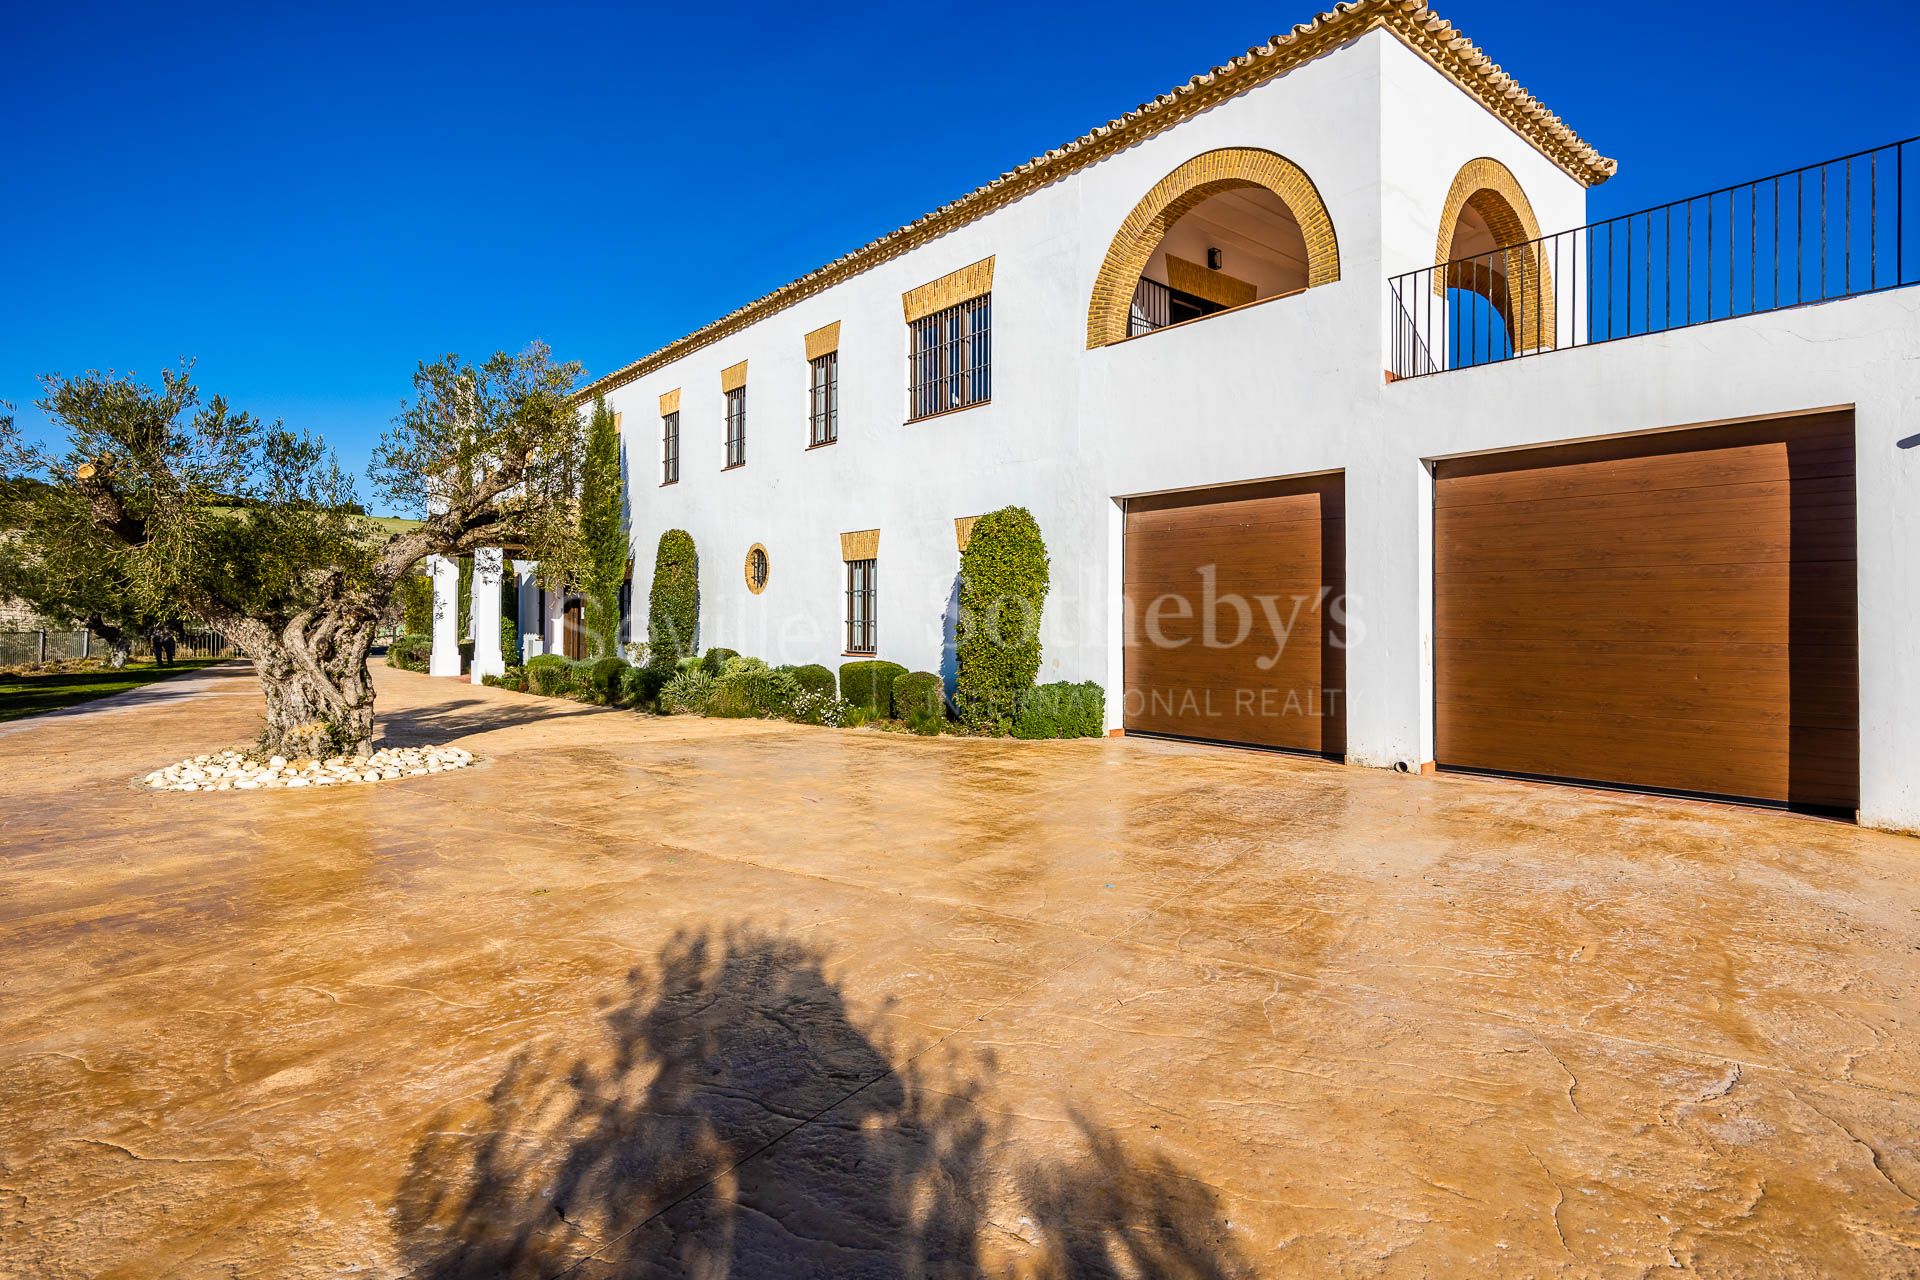 Dream Property: Tourist Complex with Vineyard and Winery in Arcos de la Frontera